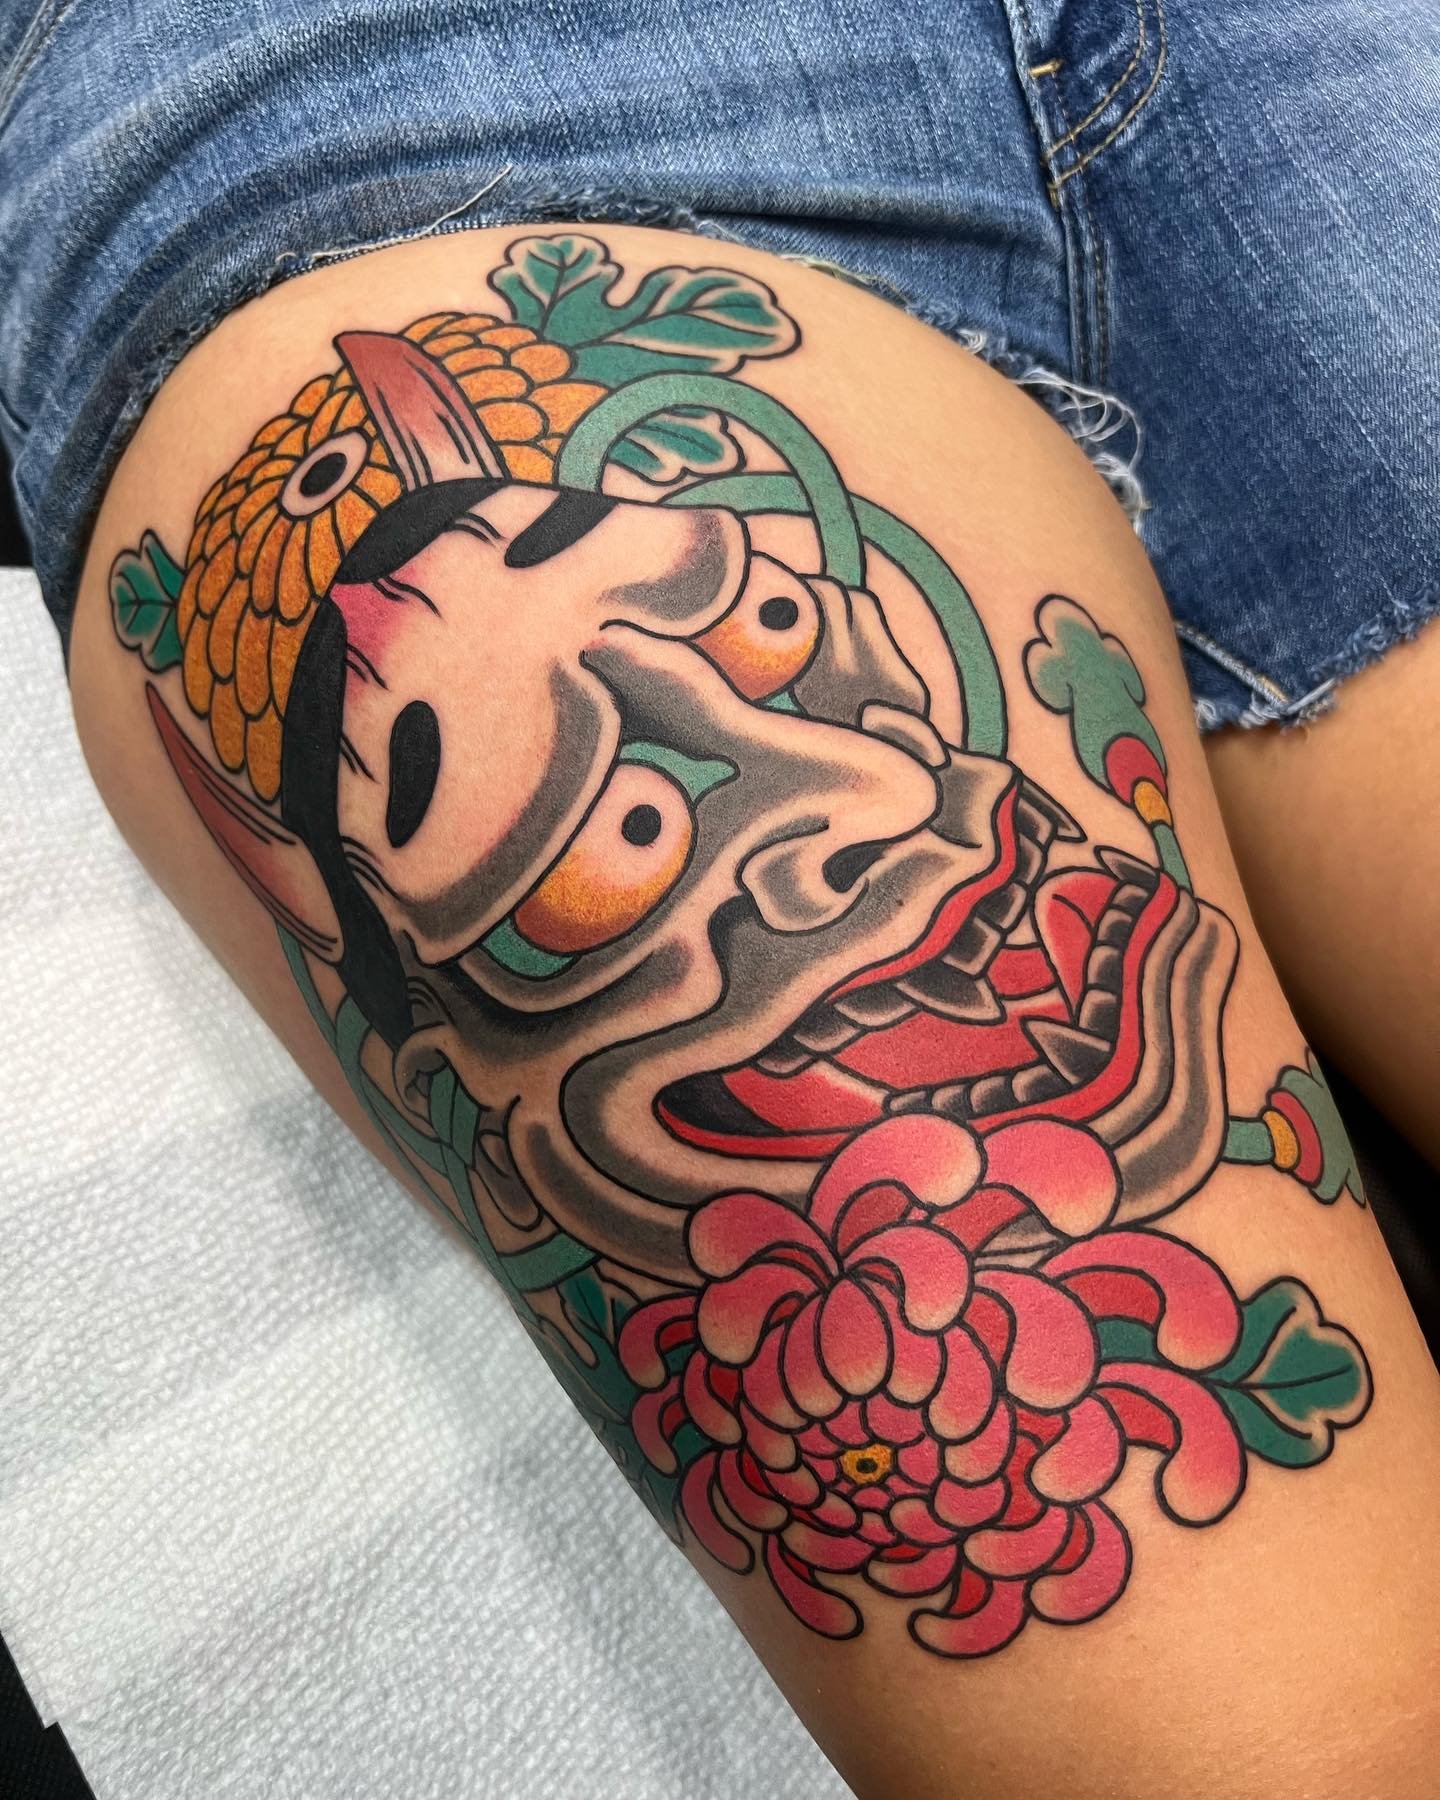 Done by Chris Stoll @stoll_tattoos #stoll #stolltattoos #chrisstoll #chrisstolltattoos #red5va
&bull;
To book with Stoll, call the studio for consult times, and information.